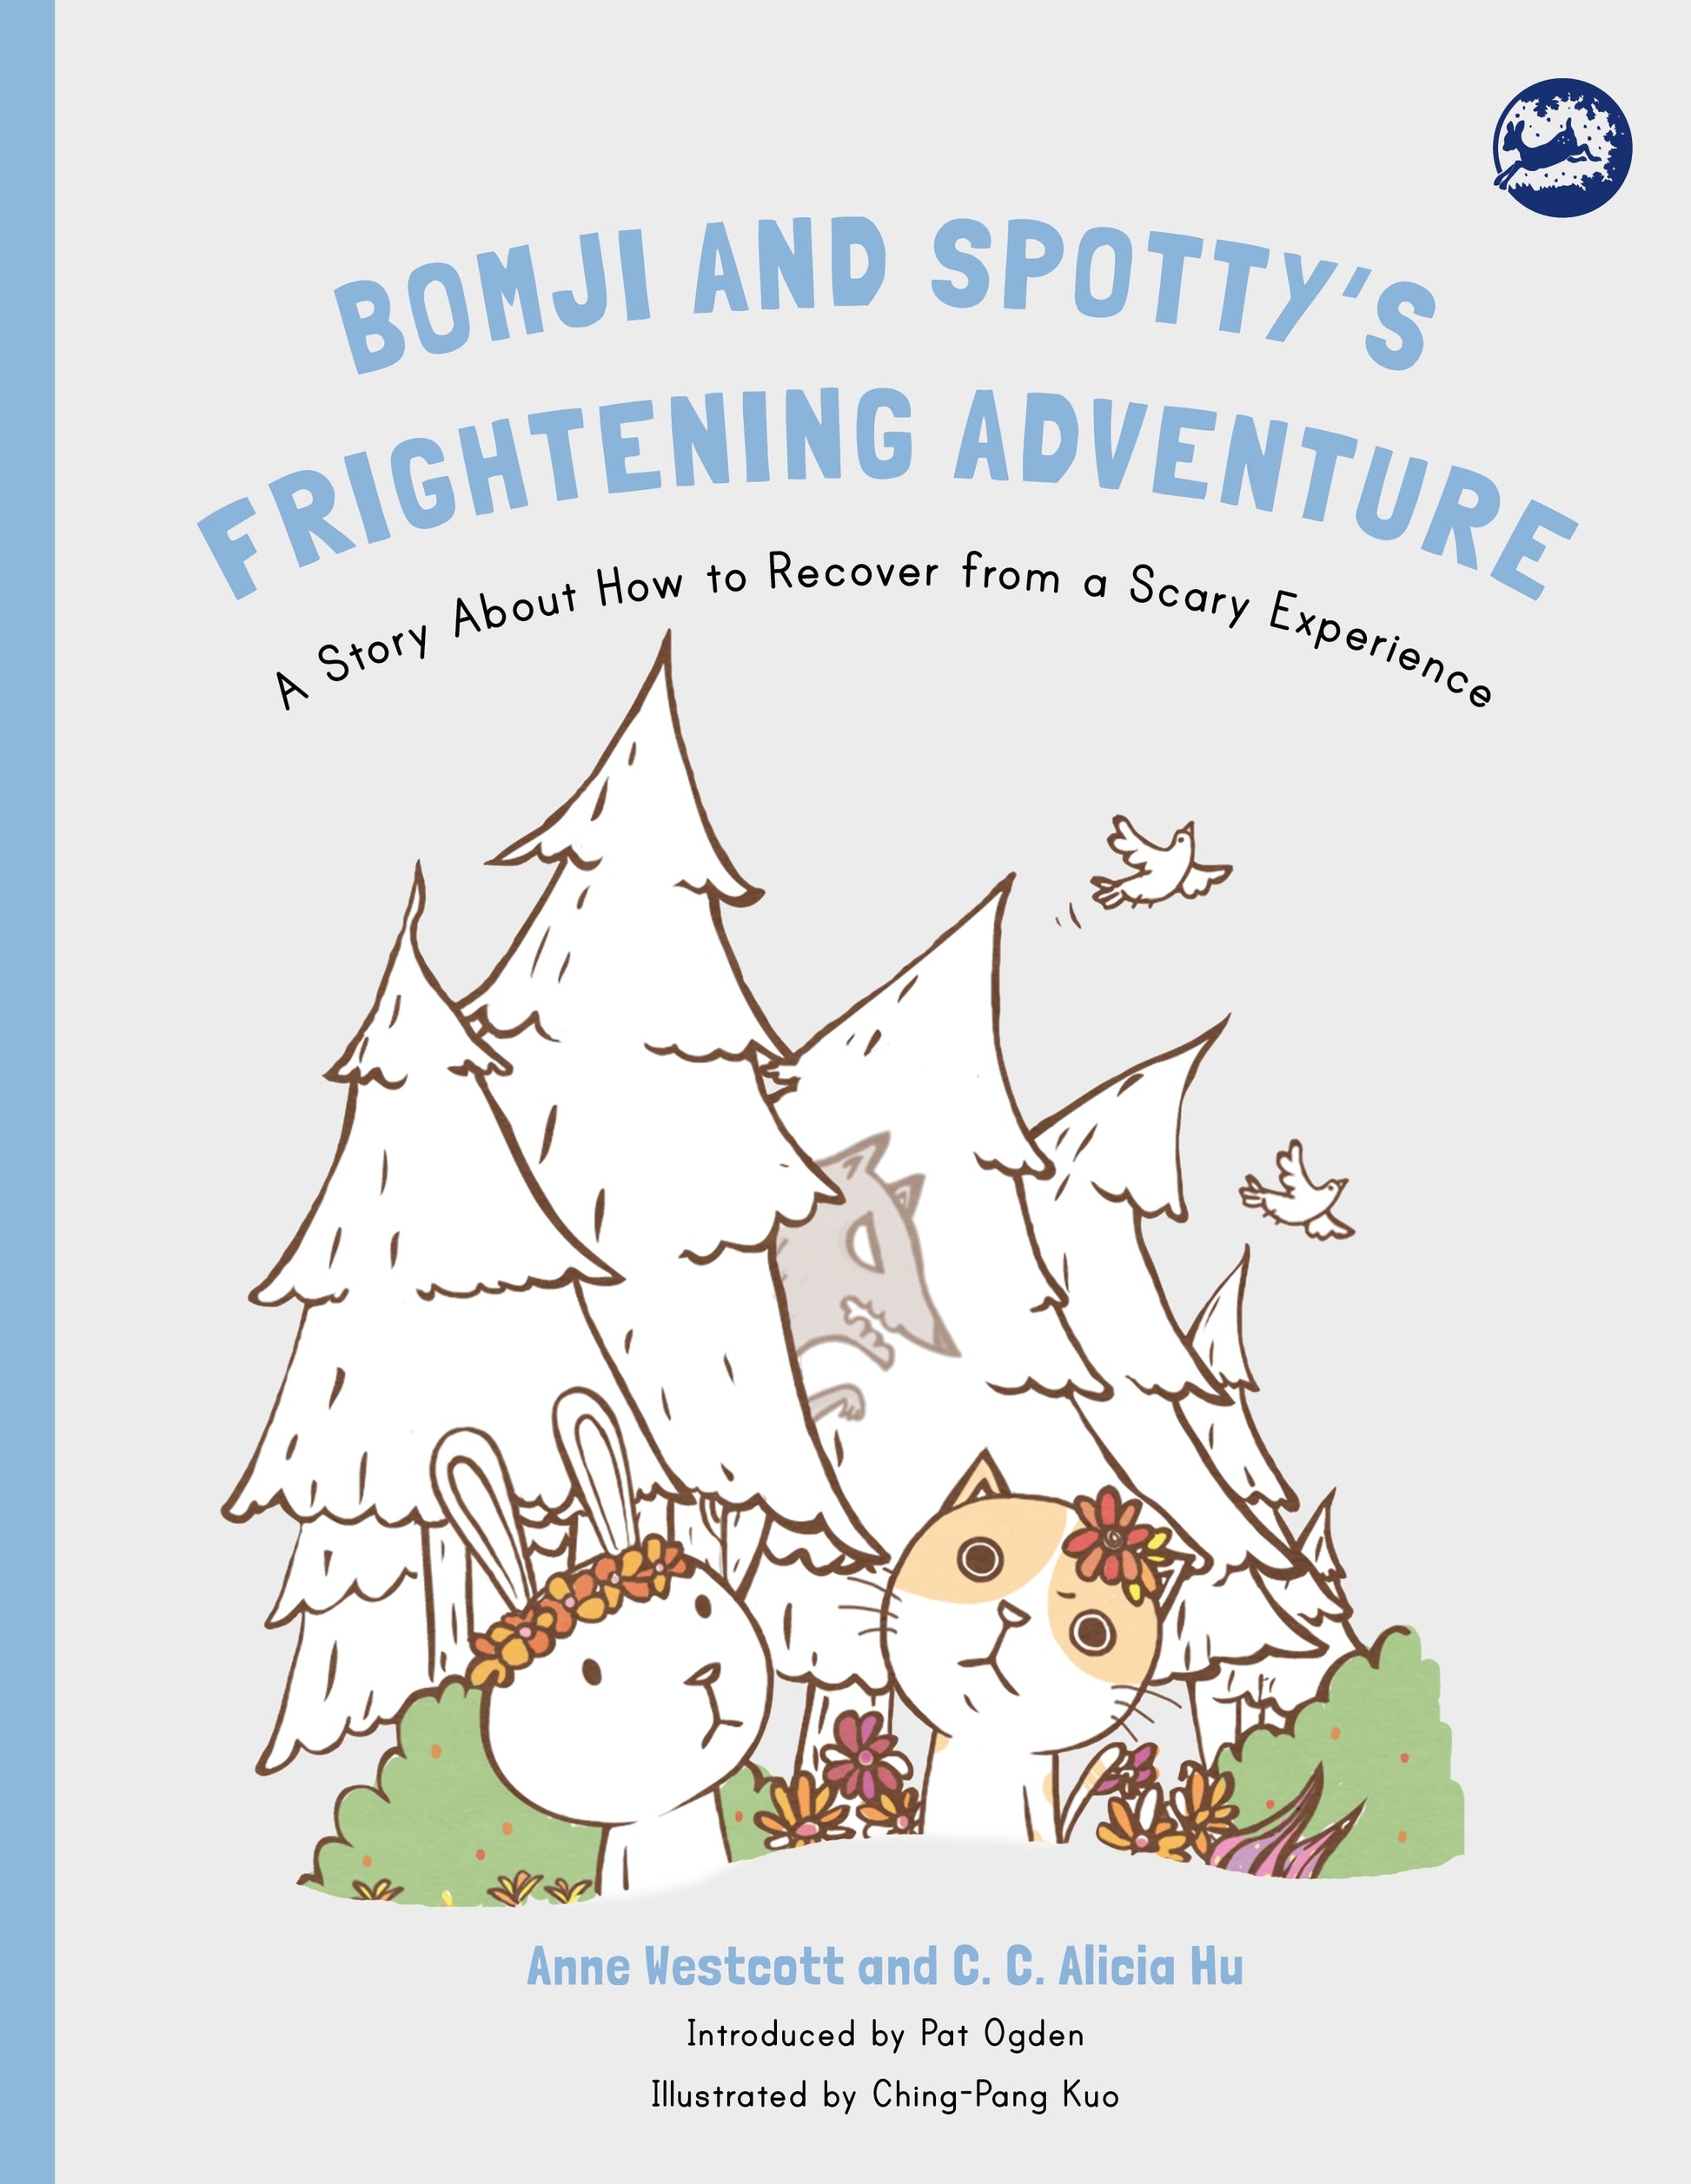 Bomji and Spotty's Frightening Adventure by Ching-Pang Kuo, Anne Westcott, C. C. Alicia Hu